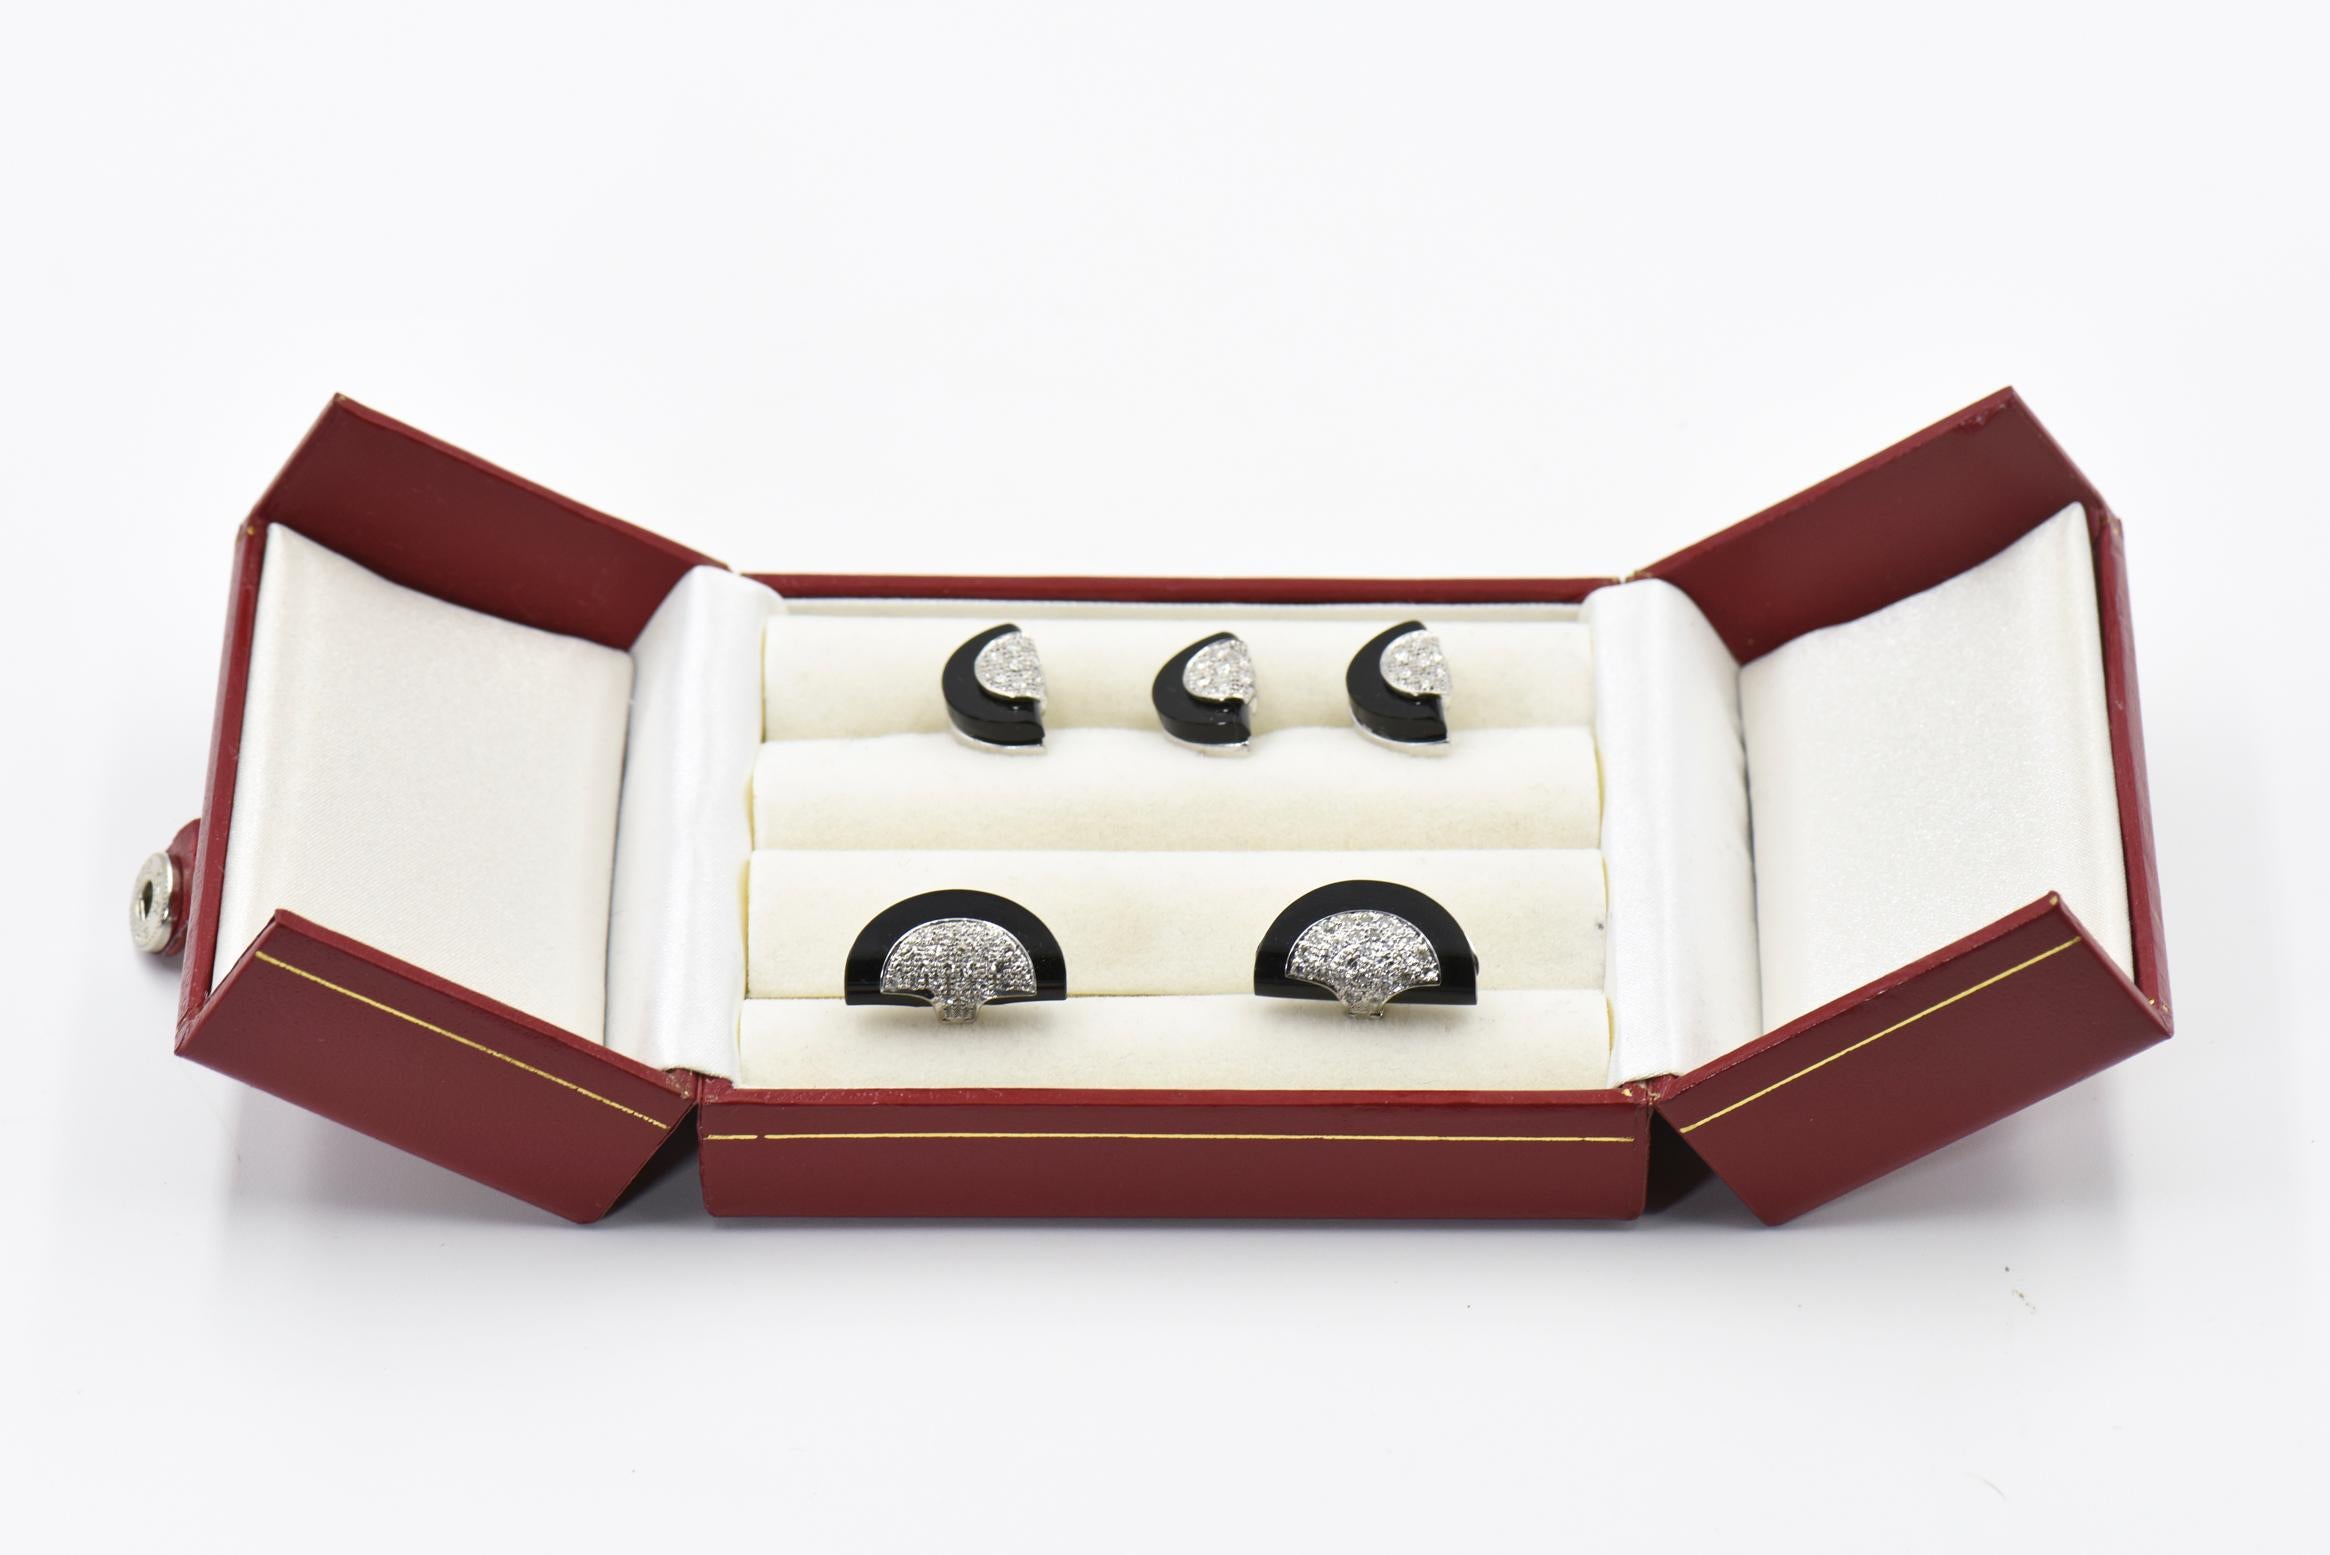 Stunning stud set featuring diamond half circle set on top of an onyx half circle mounted in 14k white gold. The set has a pair of cufflinks and 3 studs.  The cufflinks have a 